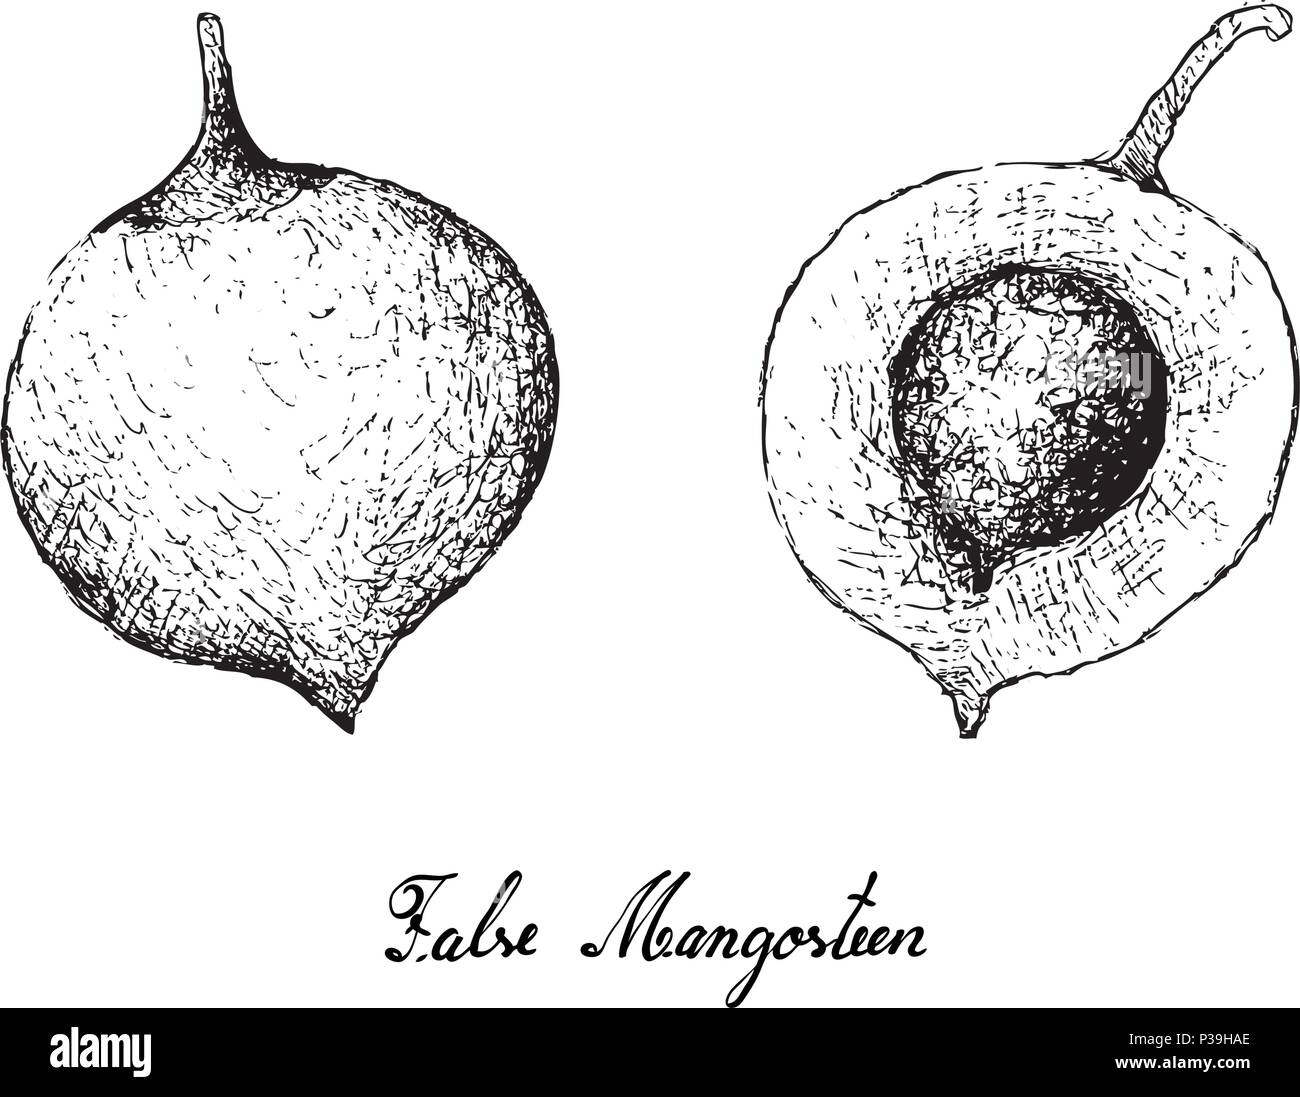 Tropical Fruits, Illustration of Hand Drawn Sketch Fresh False Mangosteen or Garcinia Cochinchinensis Fruits Isolated on White Background. Stock Vector